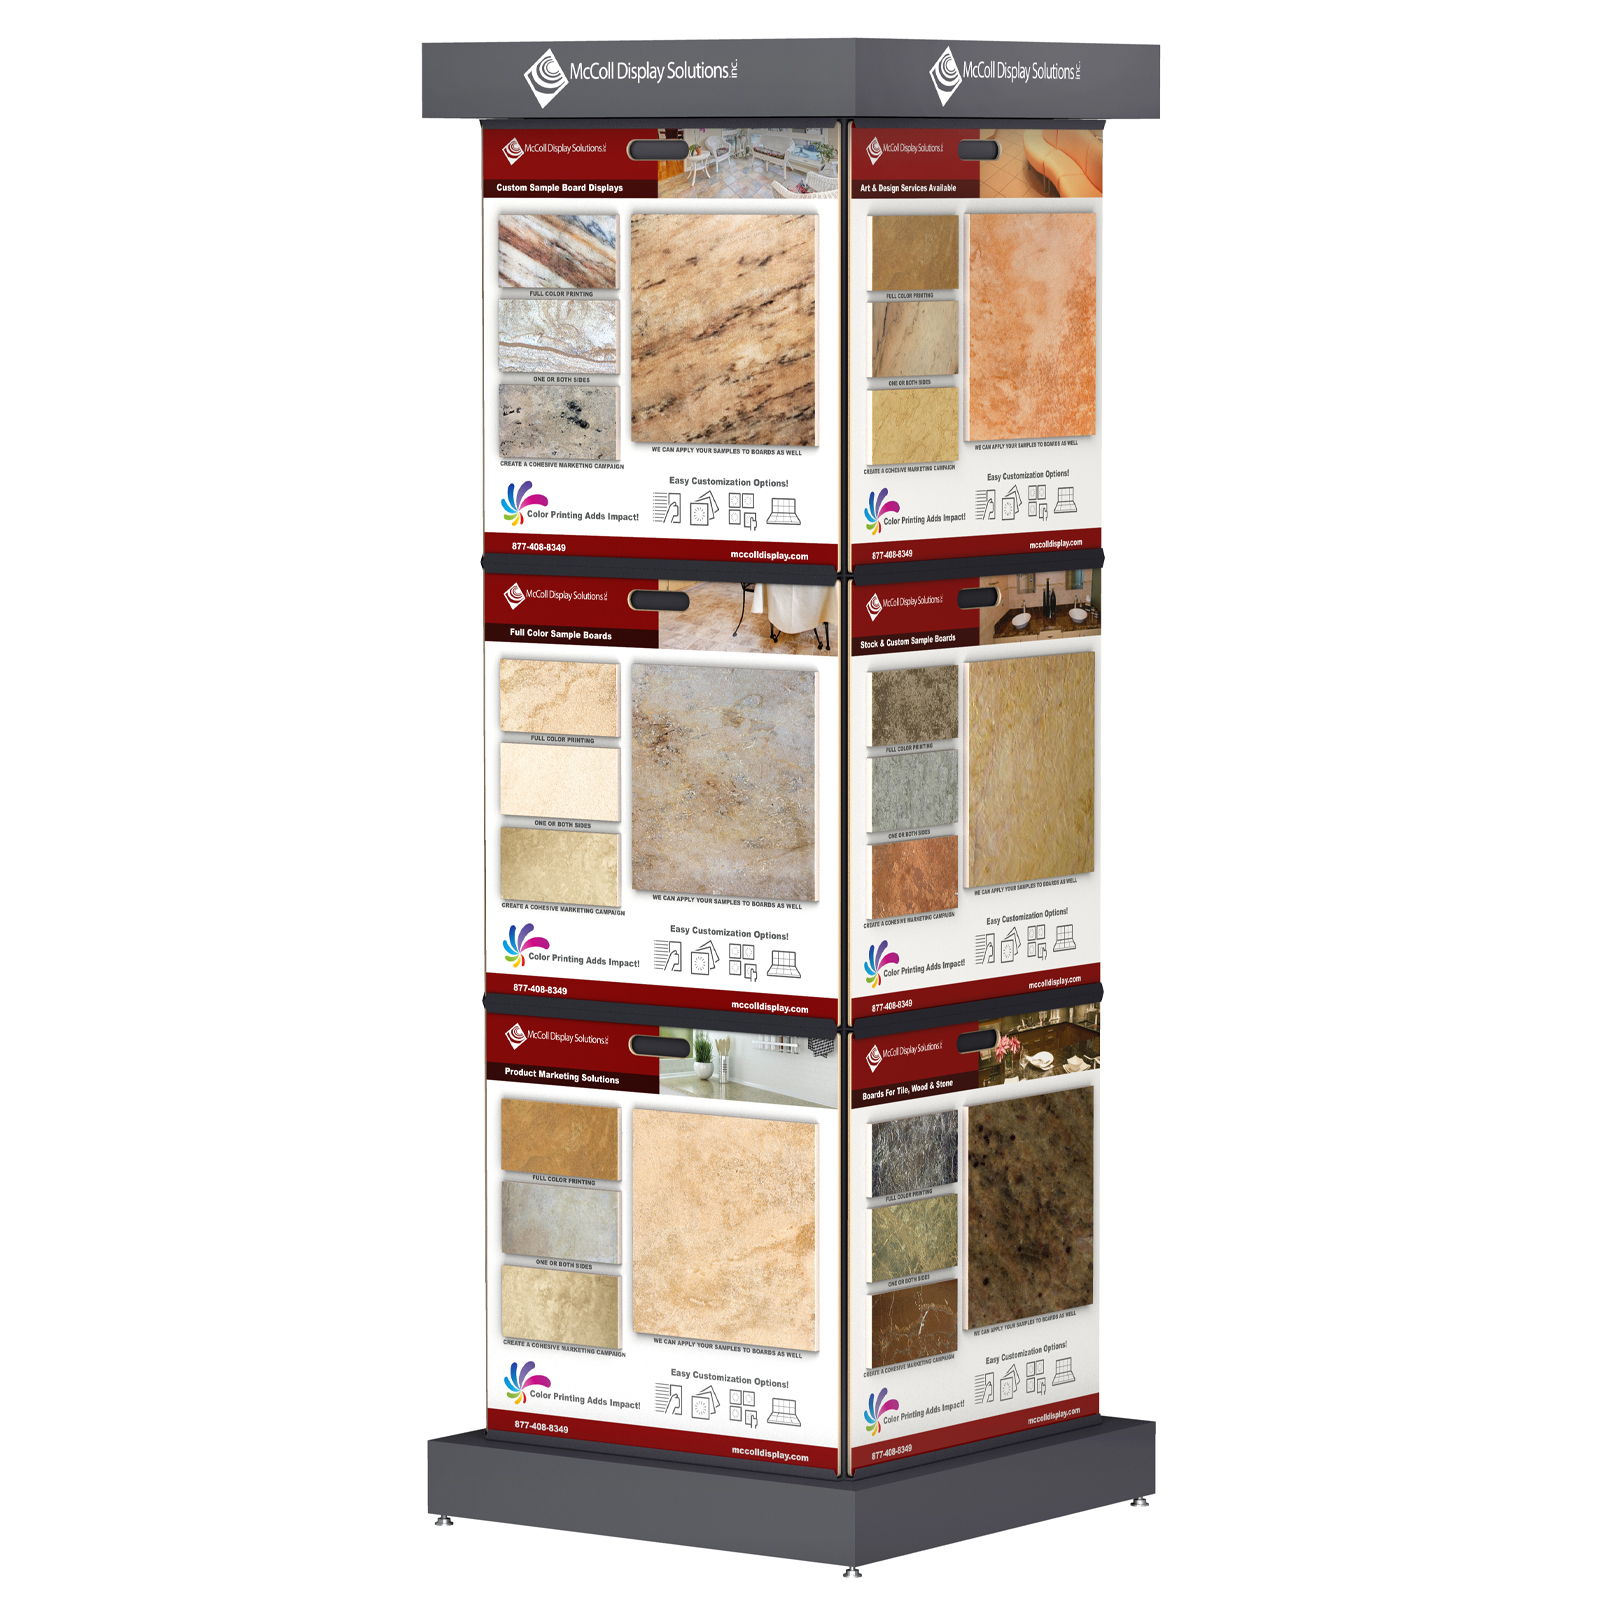 CD66 Centerpiece Display Tower for Flooring Sample Boards Channel System Showroom Displays